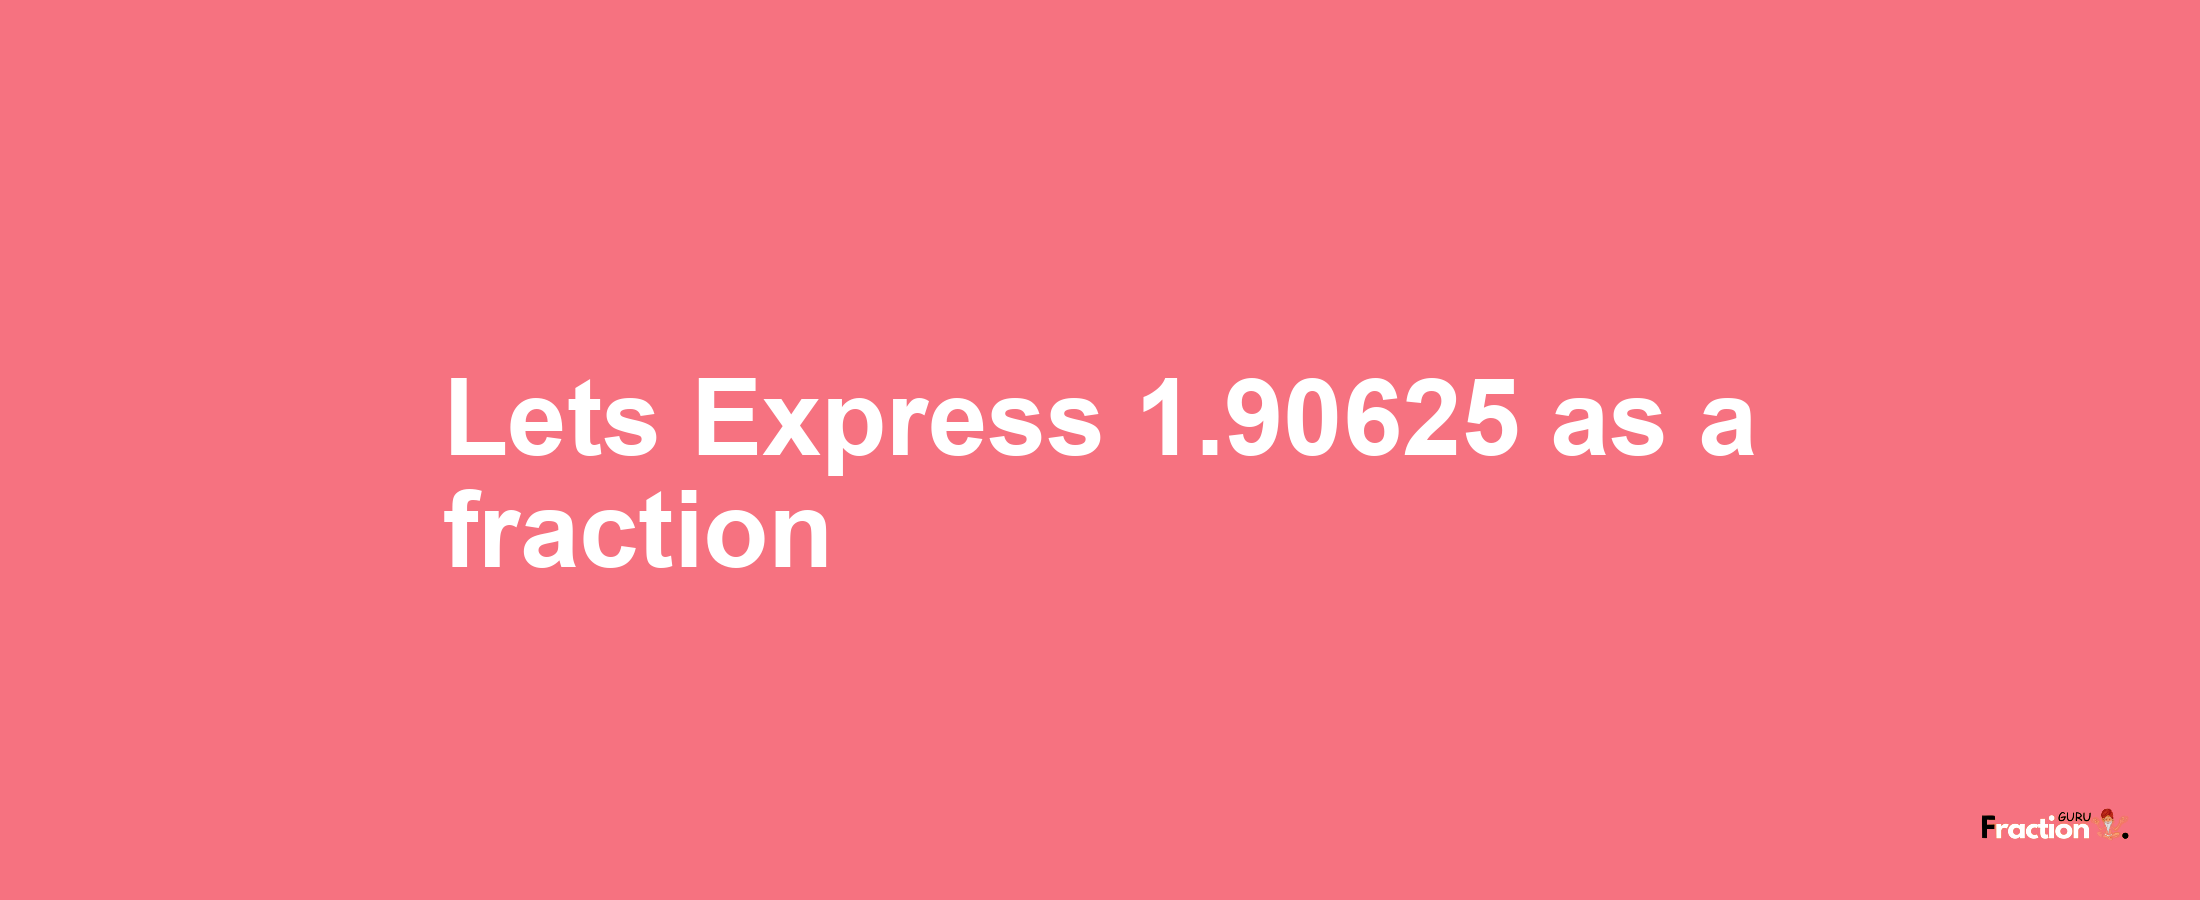 Lets Express 1.90625 as afraction